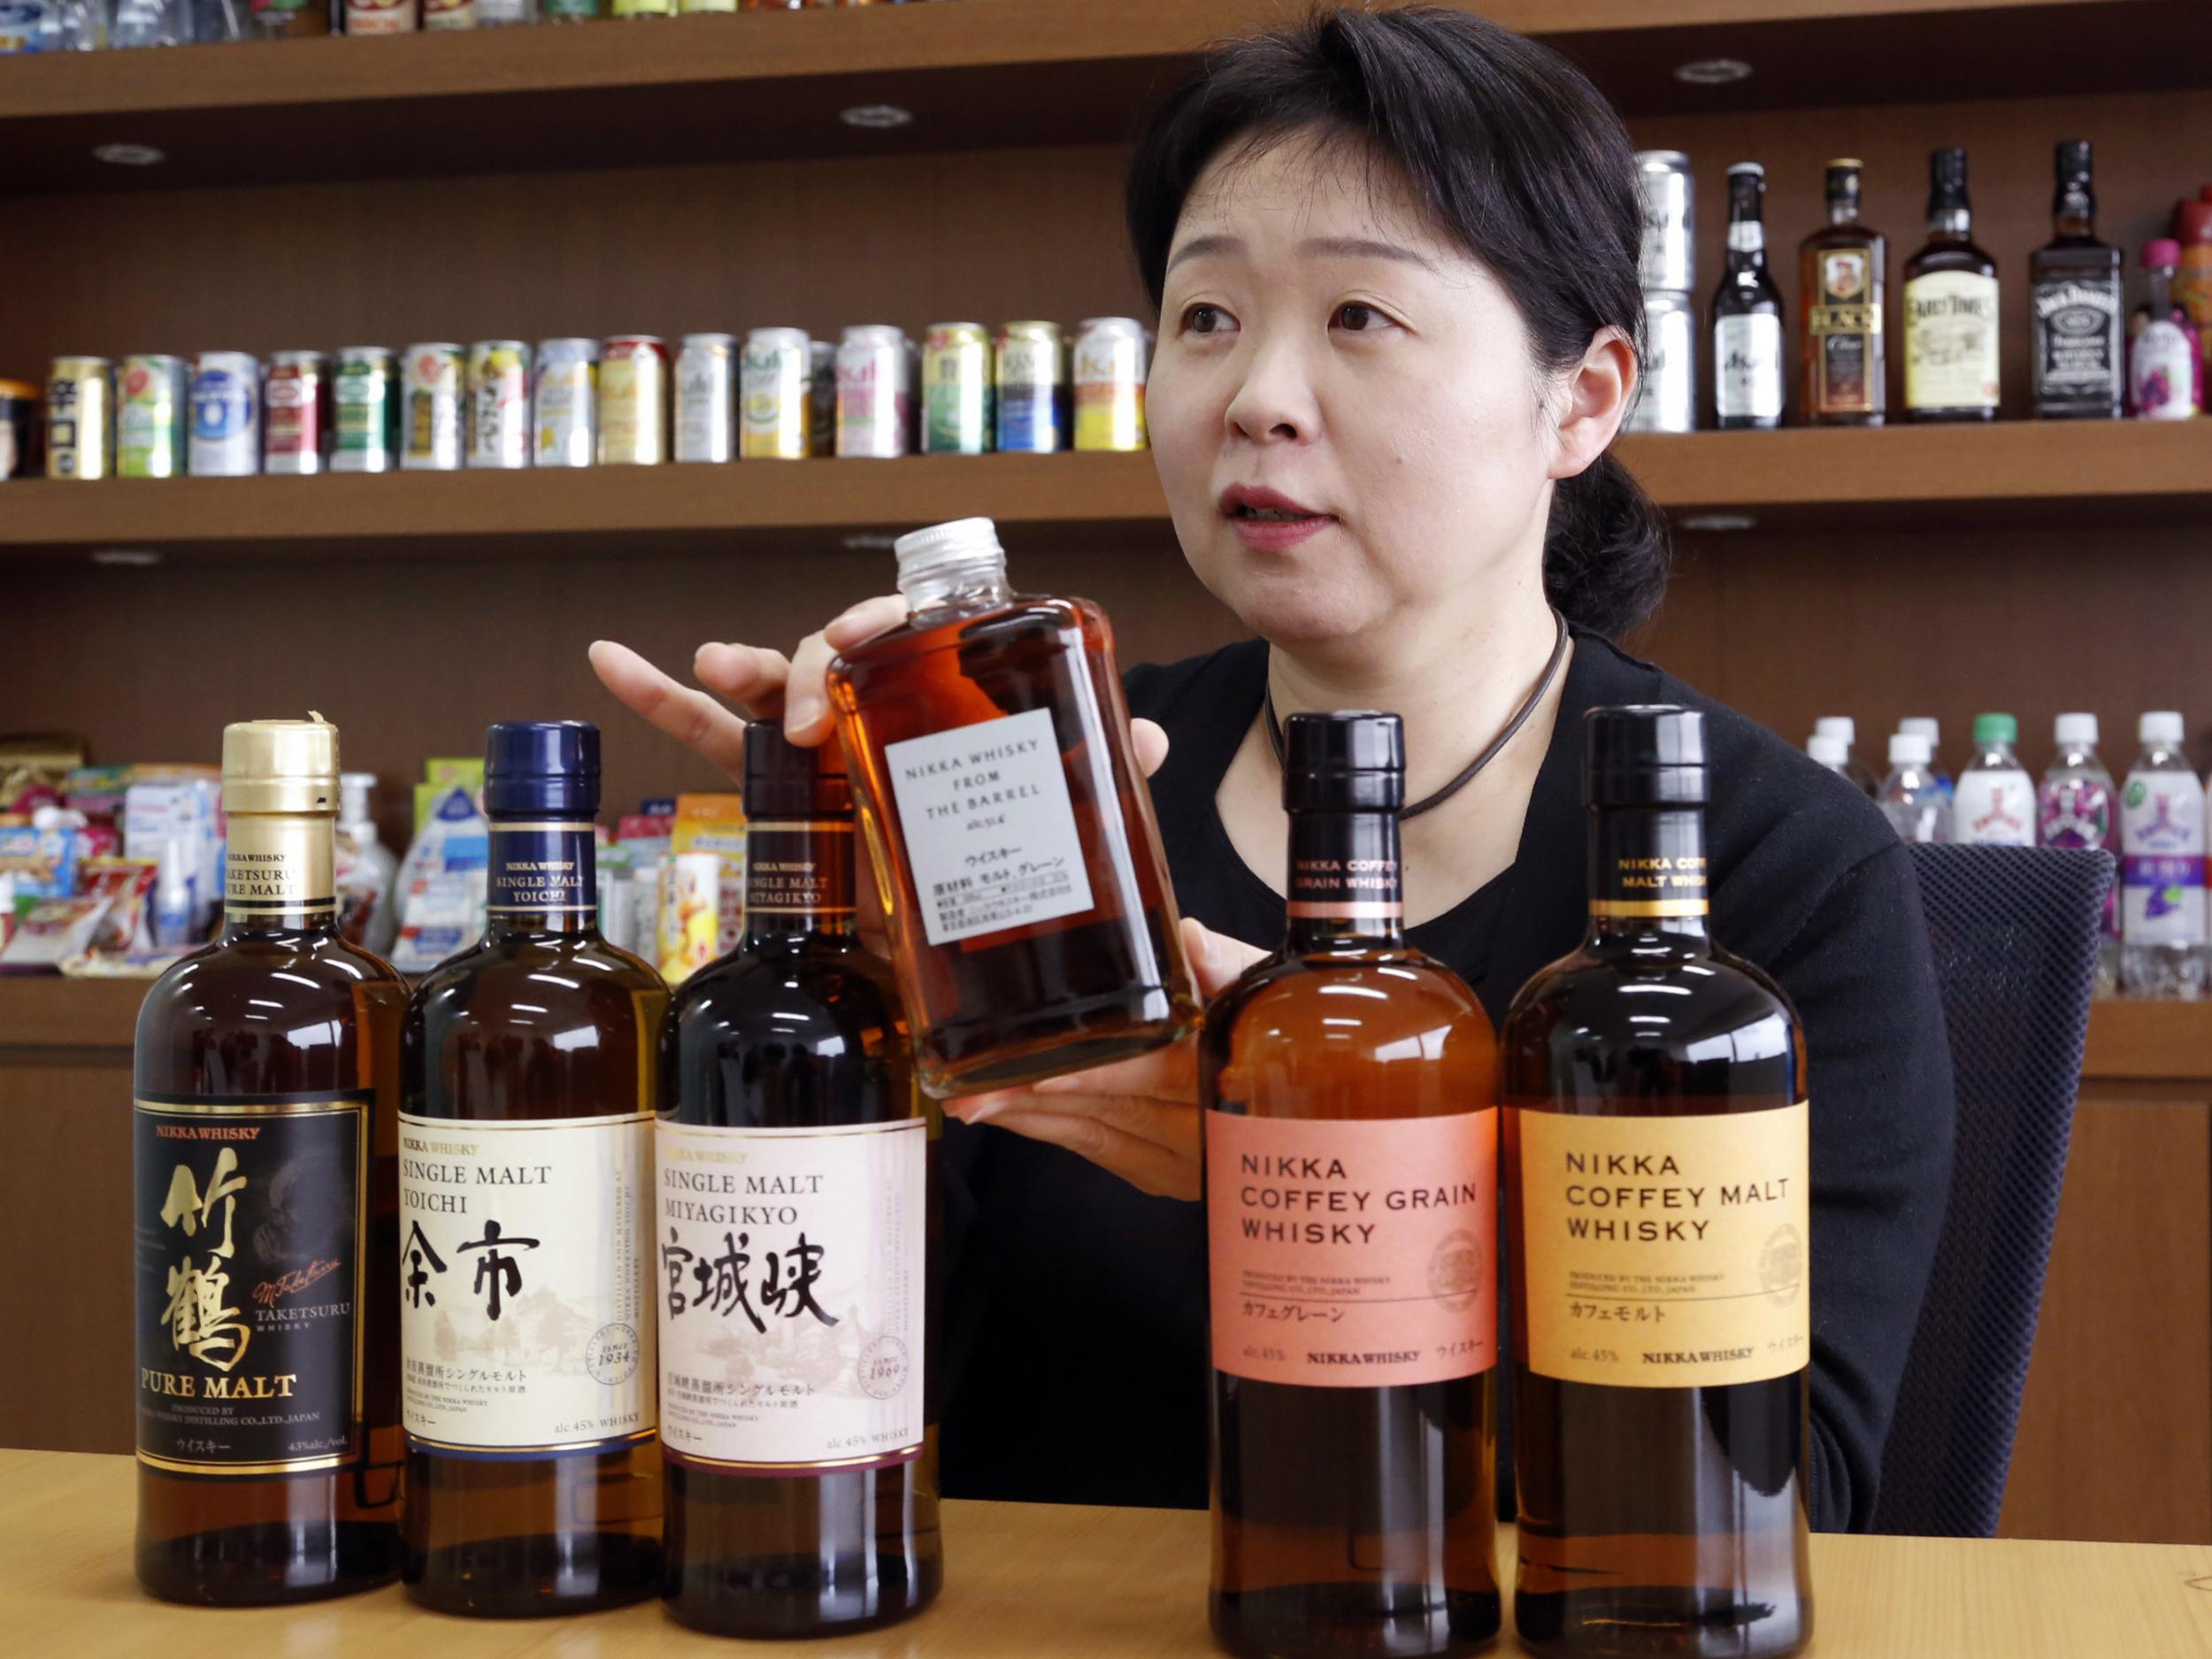 Nikka Whisky's international business development manager Emiko Kaji speaks while showing bottles of their whisky at the headquarters of Asahi Breweries in Tokyo